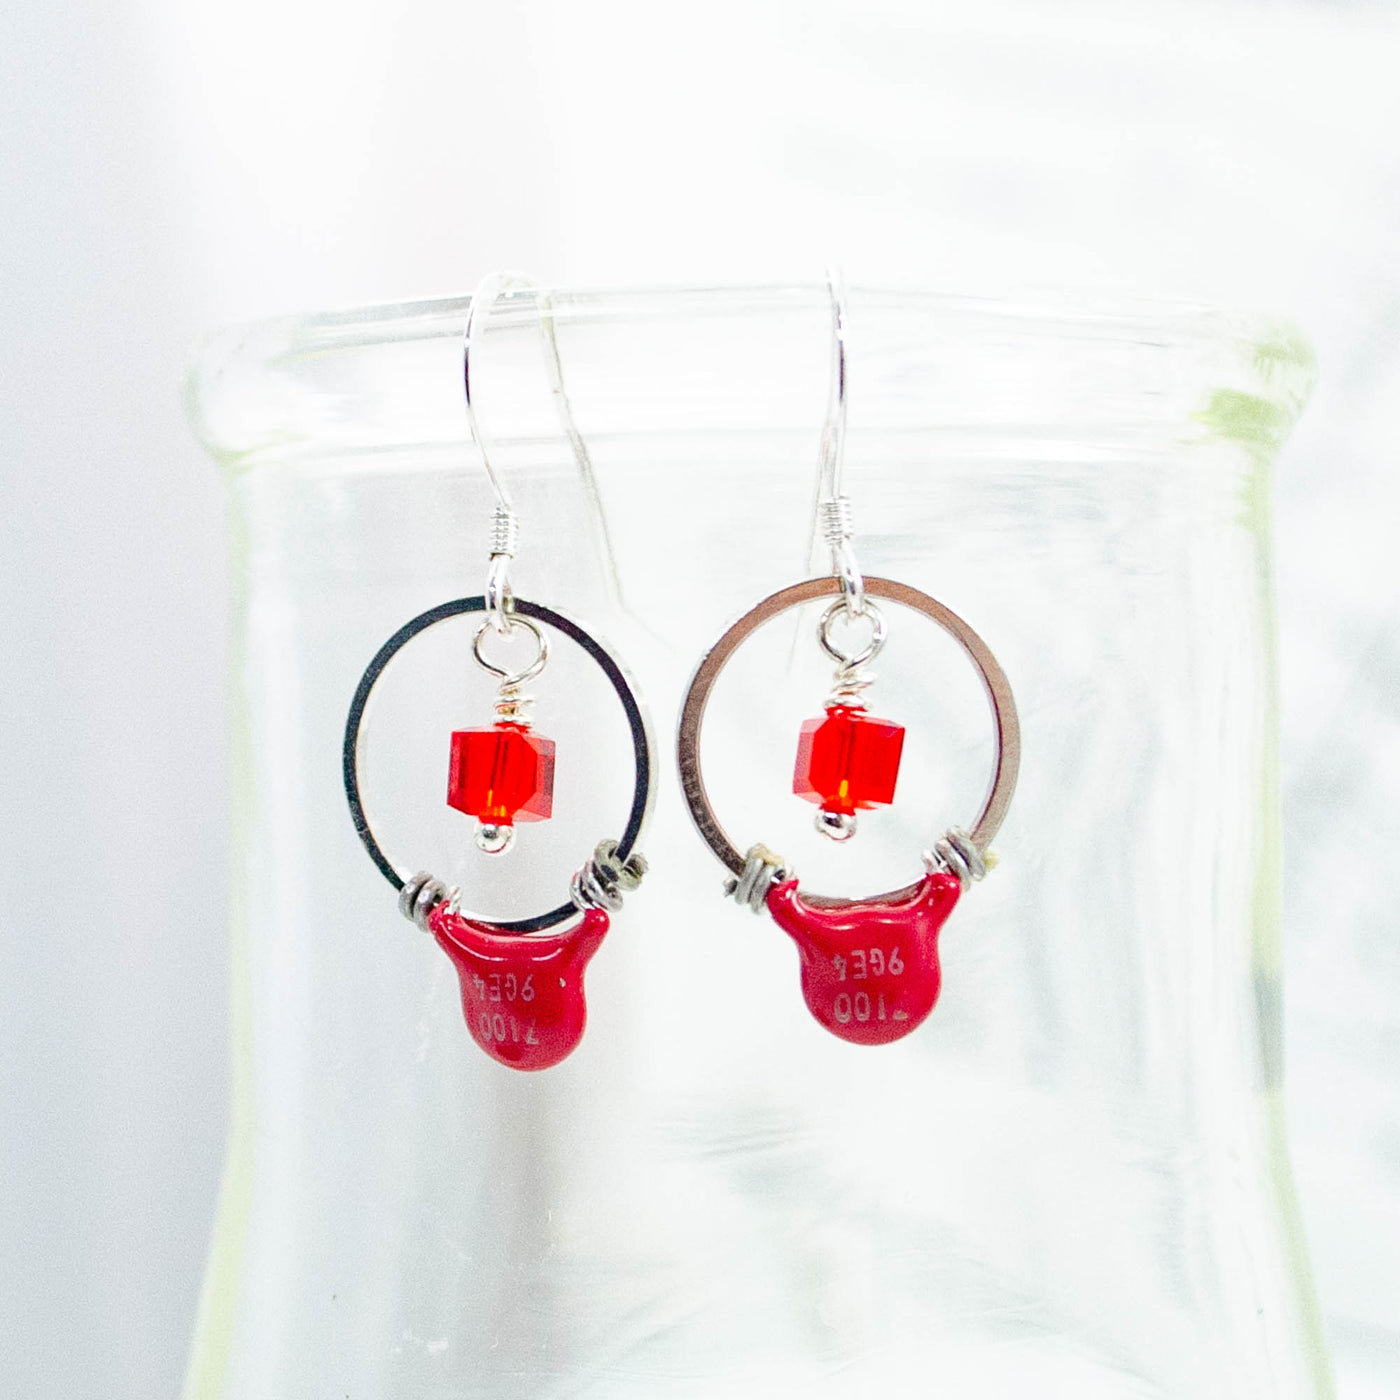 Electronic Component Earrings - Red Capacitors